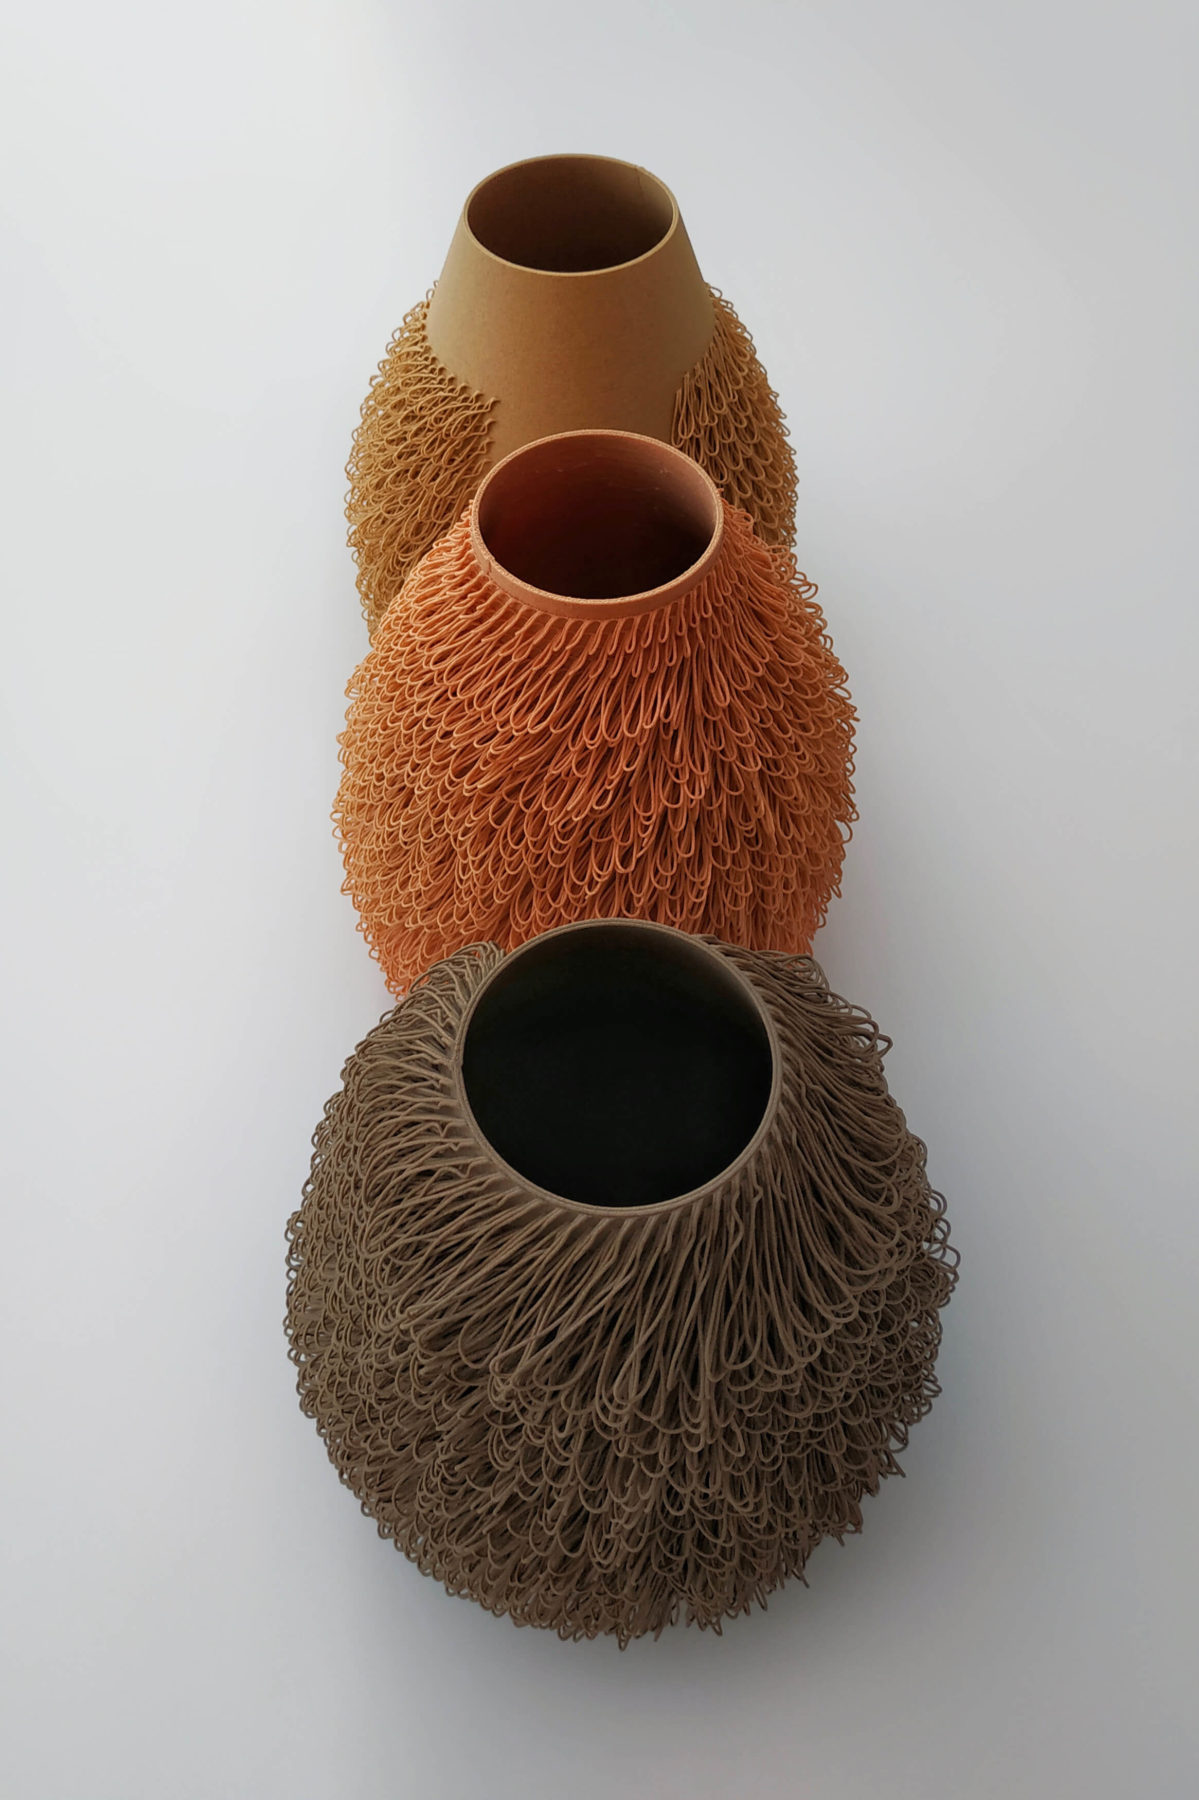 POILU vase collection by bold-design